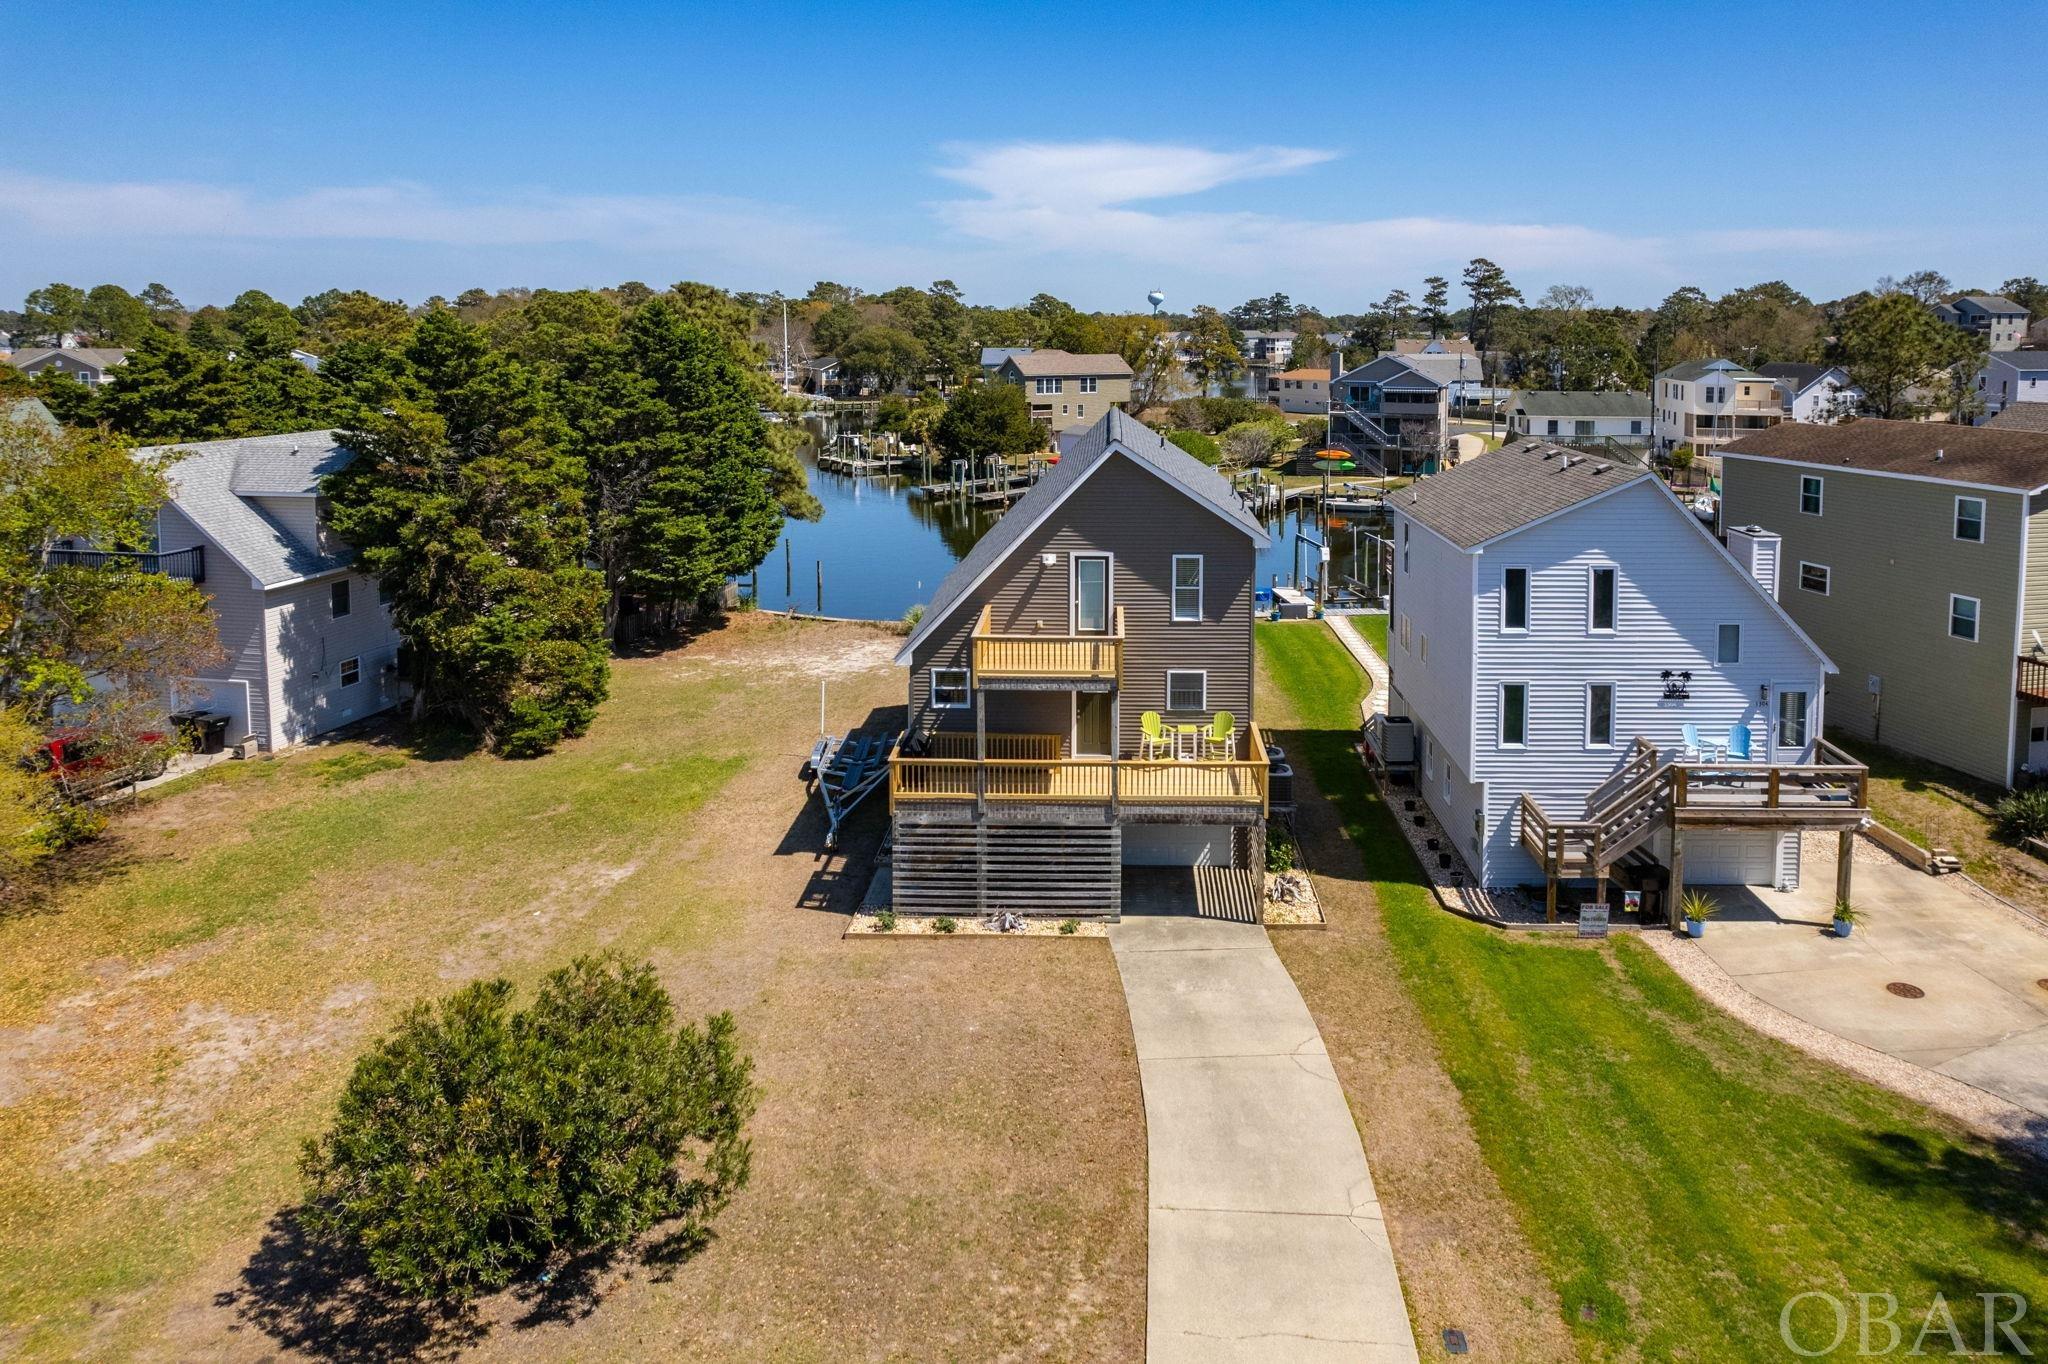 **MOVE IN READY** The best of both worlds for Water Views and Sunset Views. This Waterfront property faces east on the canal side with 2 story sun decks and faces west towards the Albemarle Sound with 2 story sun decks as well. So take your pick and sit back to relax and enjoy the views. Top Quality Renovations have been made throughout by the current seller and are too numerous to list. The attention to detail shows. Ask for the complete renovation list or view in the associated docs. You will not be disappointed with this updated and renovated 3 bedroom 2 bath waterfront home. The large ground floor garage and storage area has ample room for all your watersports equipment and beach gear storage. Plus, there is a dry entry as well to make coming home on those rainy days a little easier. Located in a 24 hour 7 day a week gated waterfront boating community with numerous amenities. The Community Amenities are: waterfront outdoor pool, covered pavilion, pool side tables with umbrellas, sun deck, pool lounge chairs, clubhouse, sound side beach with park, playground, bath house, boat ramp, marina, docks, dog park, and basketball court. Nearby, is a community favorite secret sound side beach for finding great pieces of driftwood. Call to schedule your showing of this beauty. Sold Furnished with a few exclusions. See the Associated Documents for Information. The boat shown on lift is also available for sale, but not included. Heated Sq. Ft. Measurements are for information purposes and to be confirmed by buyers agent